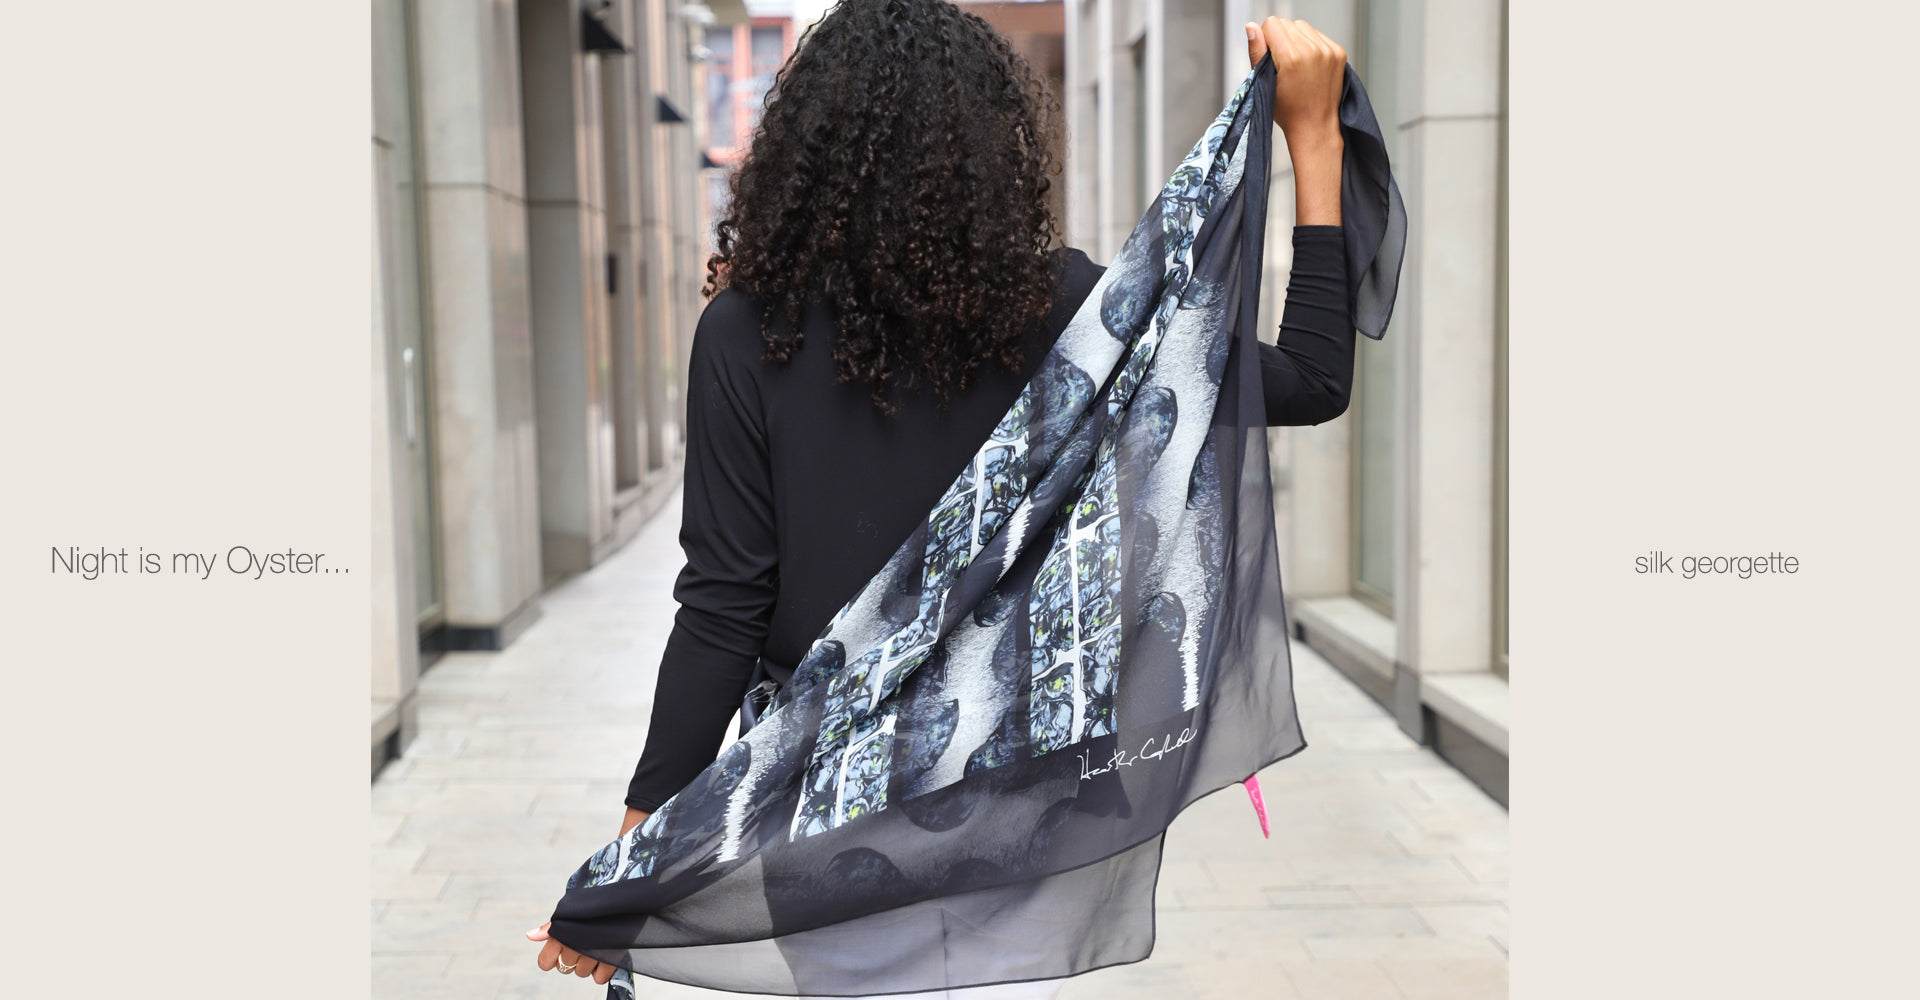 Luxury Scarves and Accessories - Heather Campbell Textiles